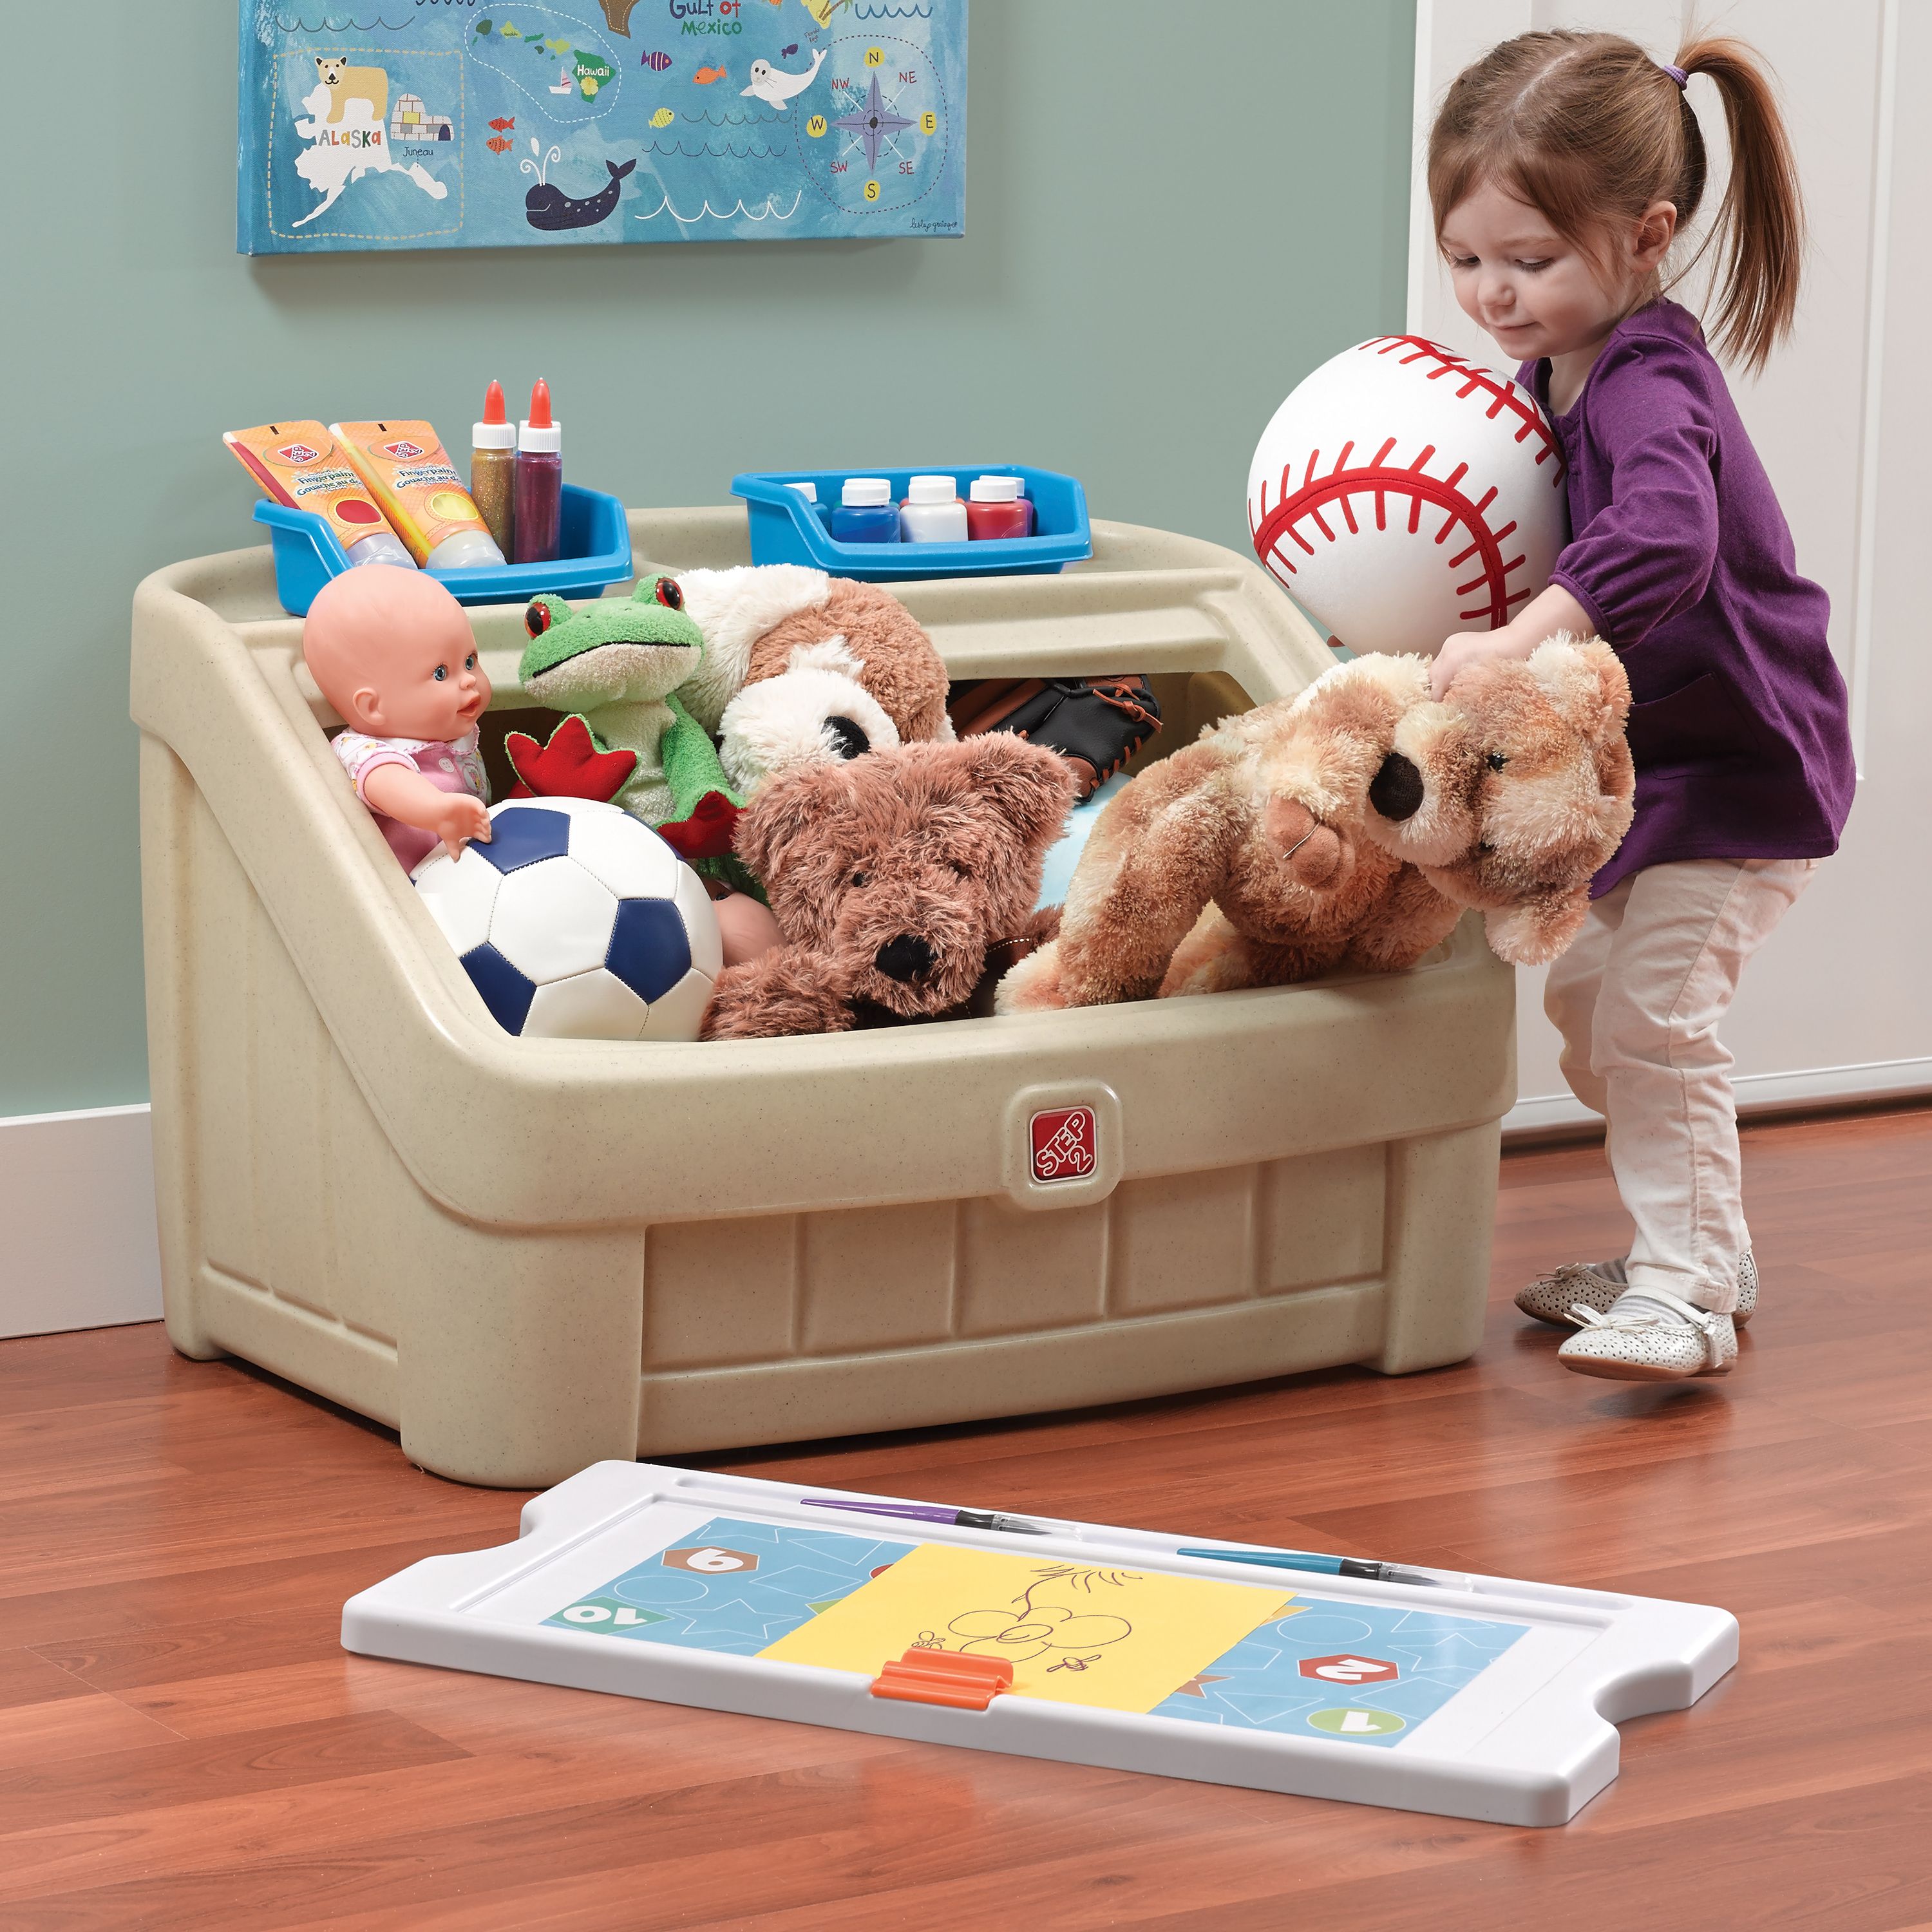 Step2 2-In-1 Tan Toy Storage Box & Art Lid Plastic Toy Chest - image 2 of 7